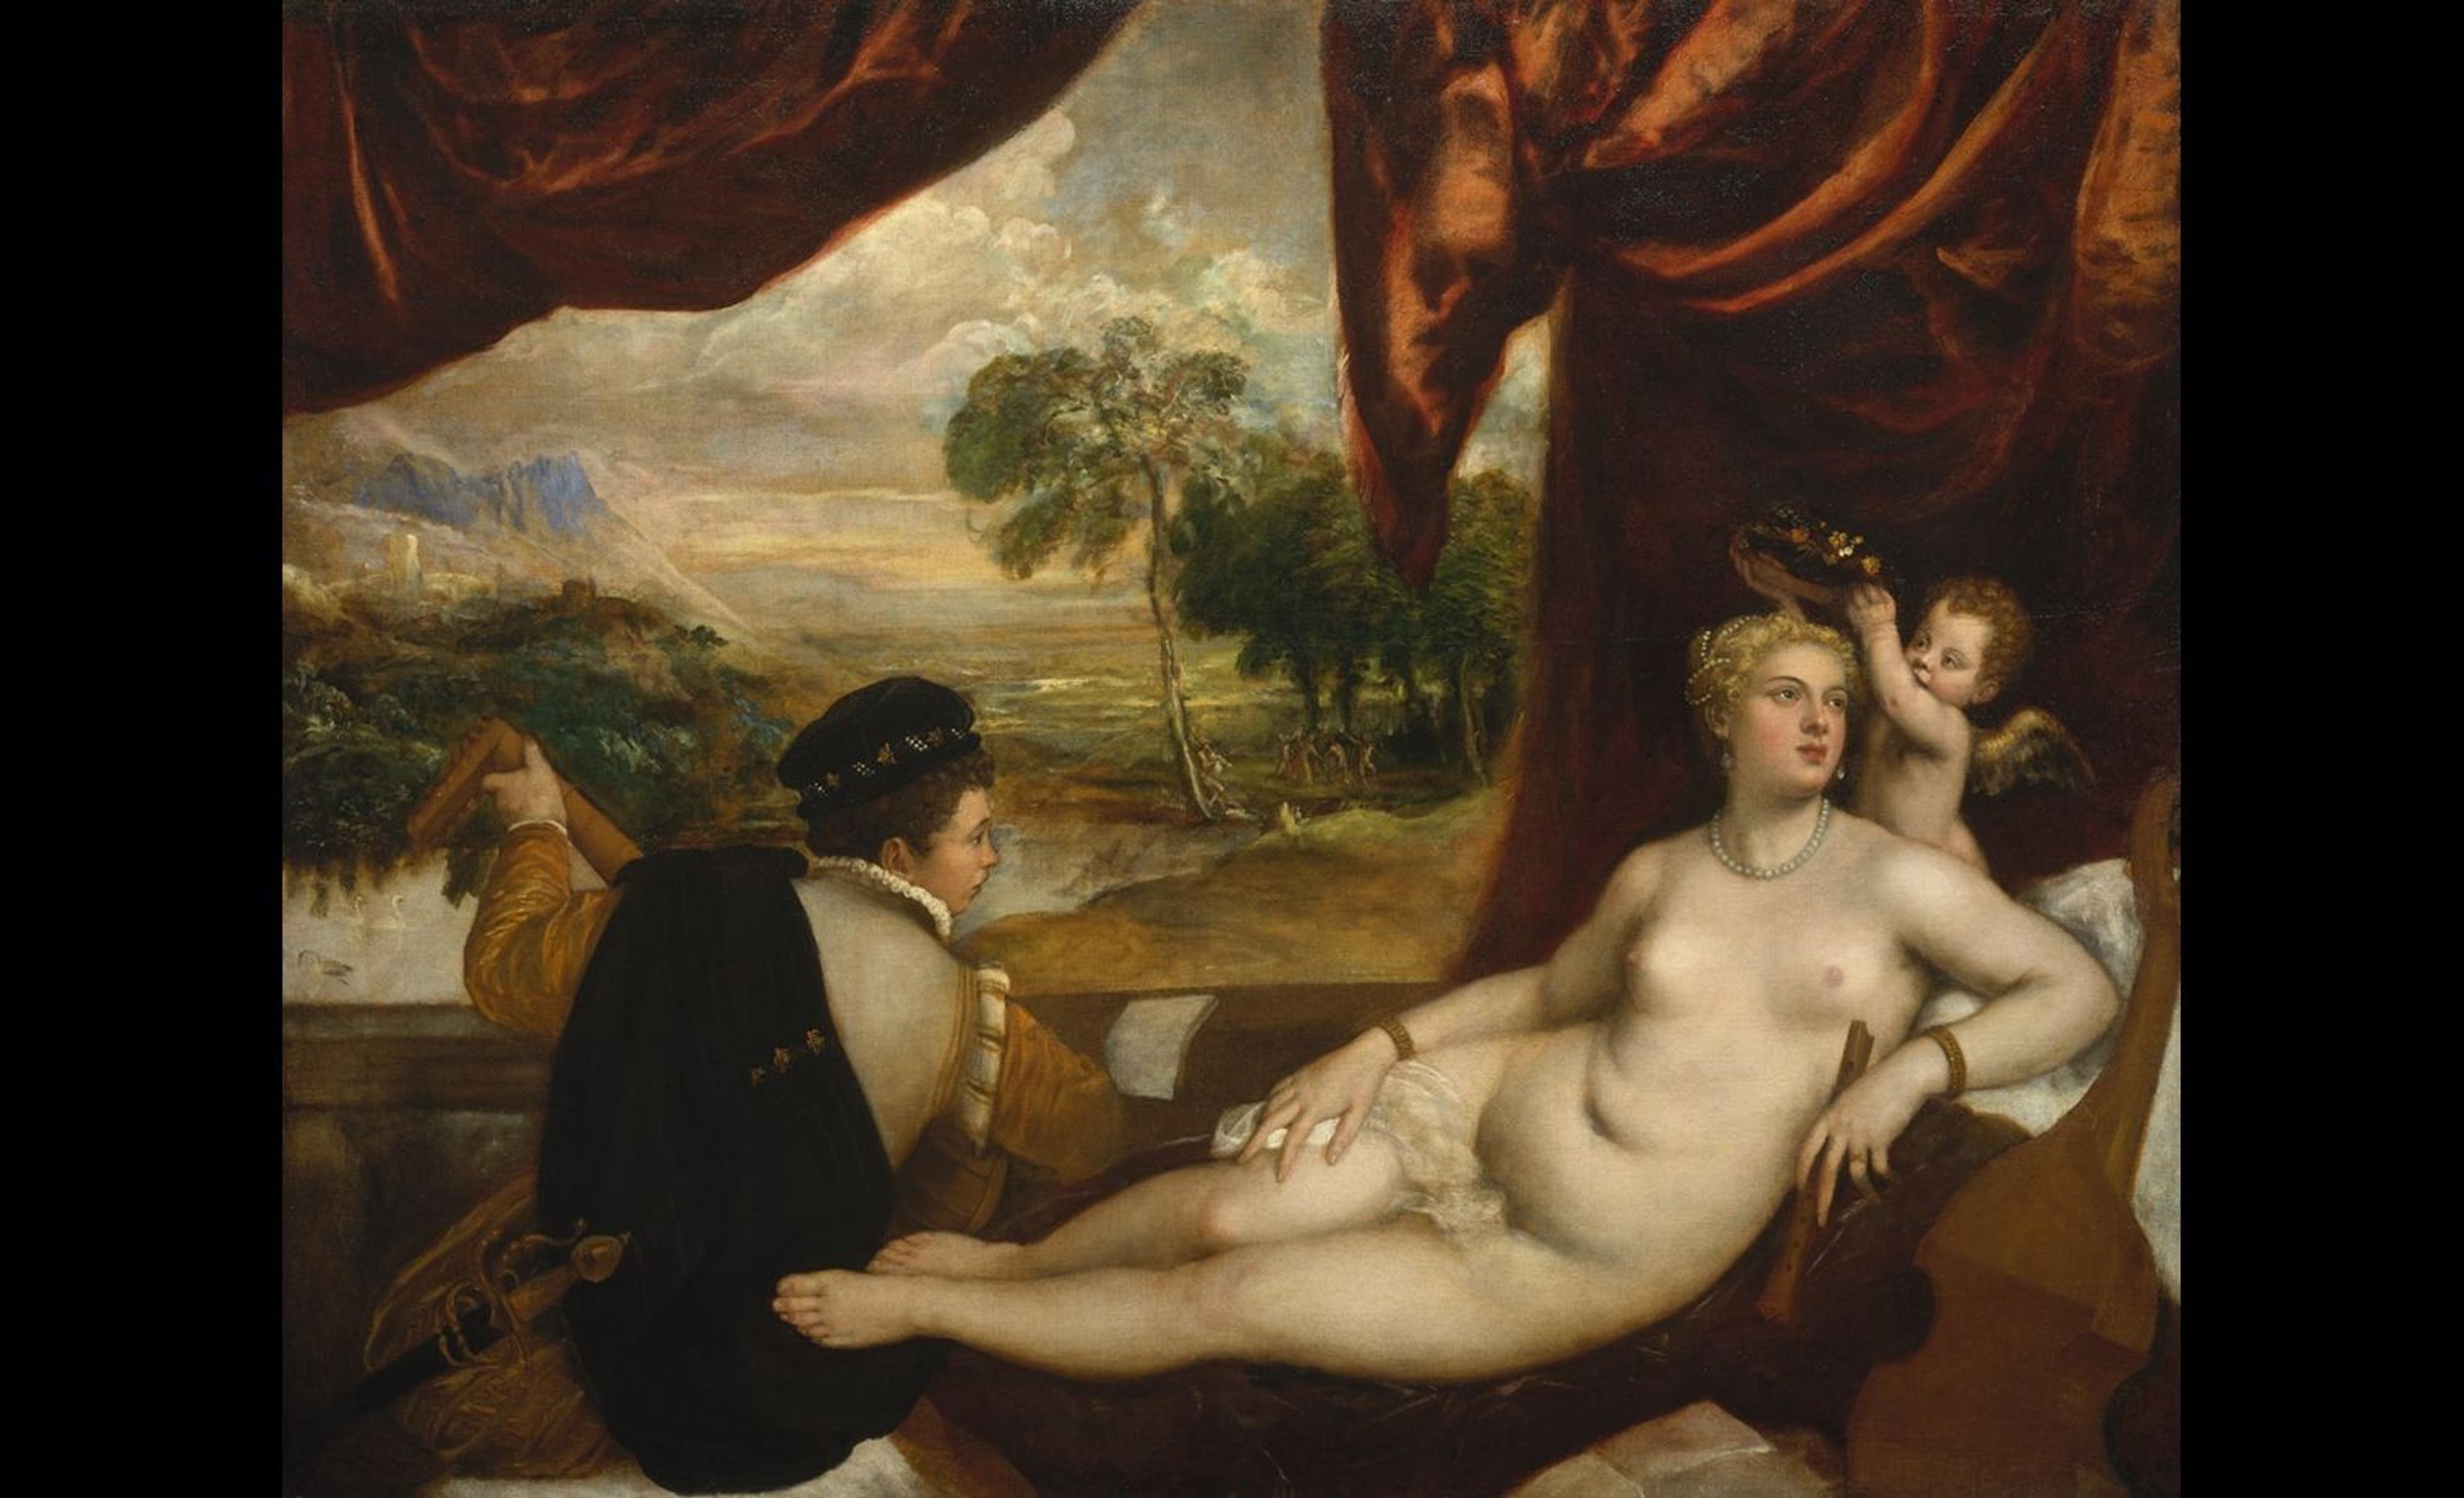 Titian painting depicting Venus lying on a bed with a lute player and a cherub